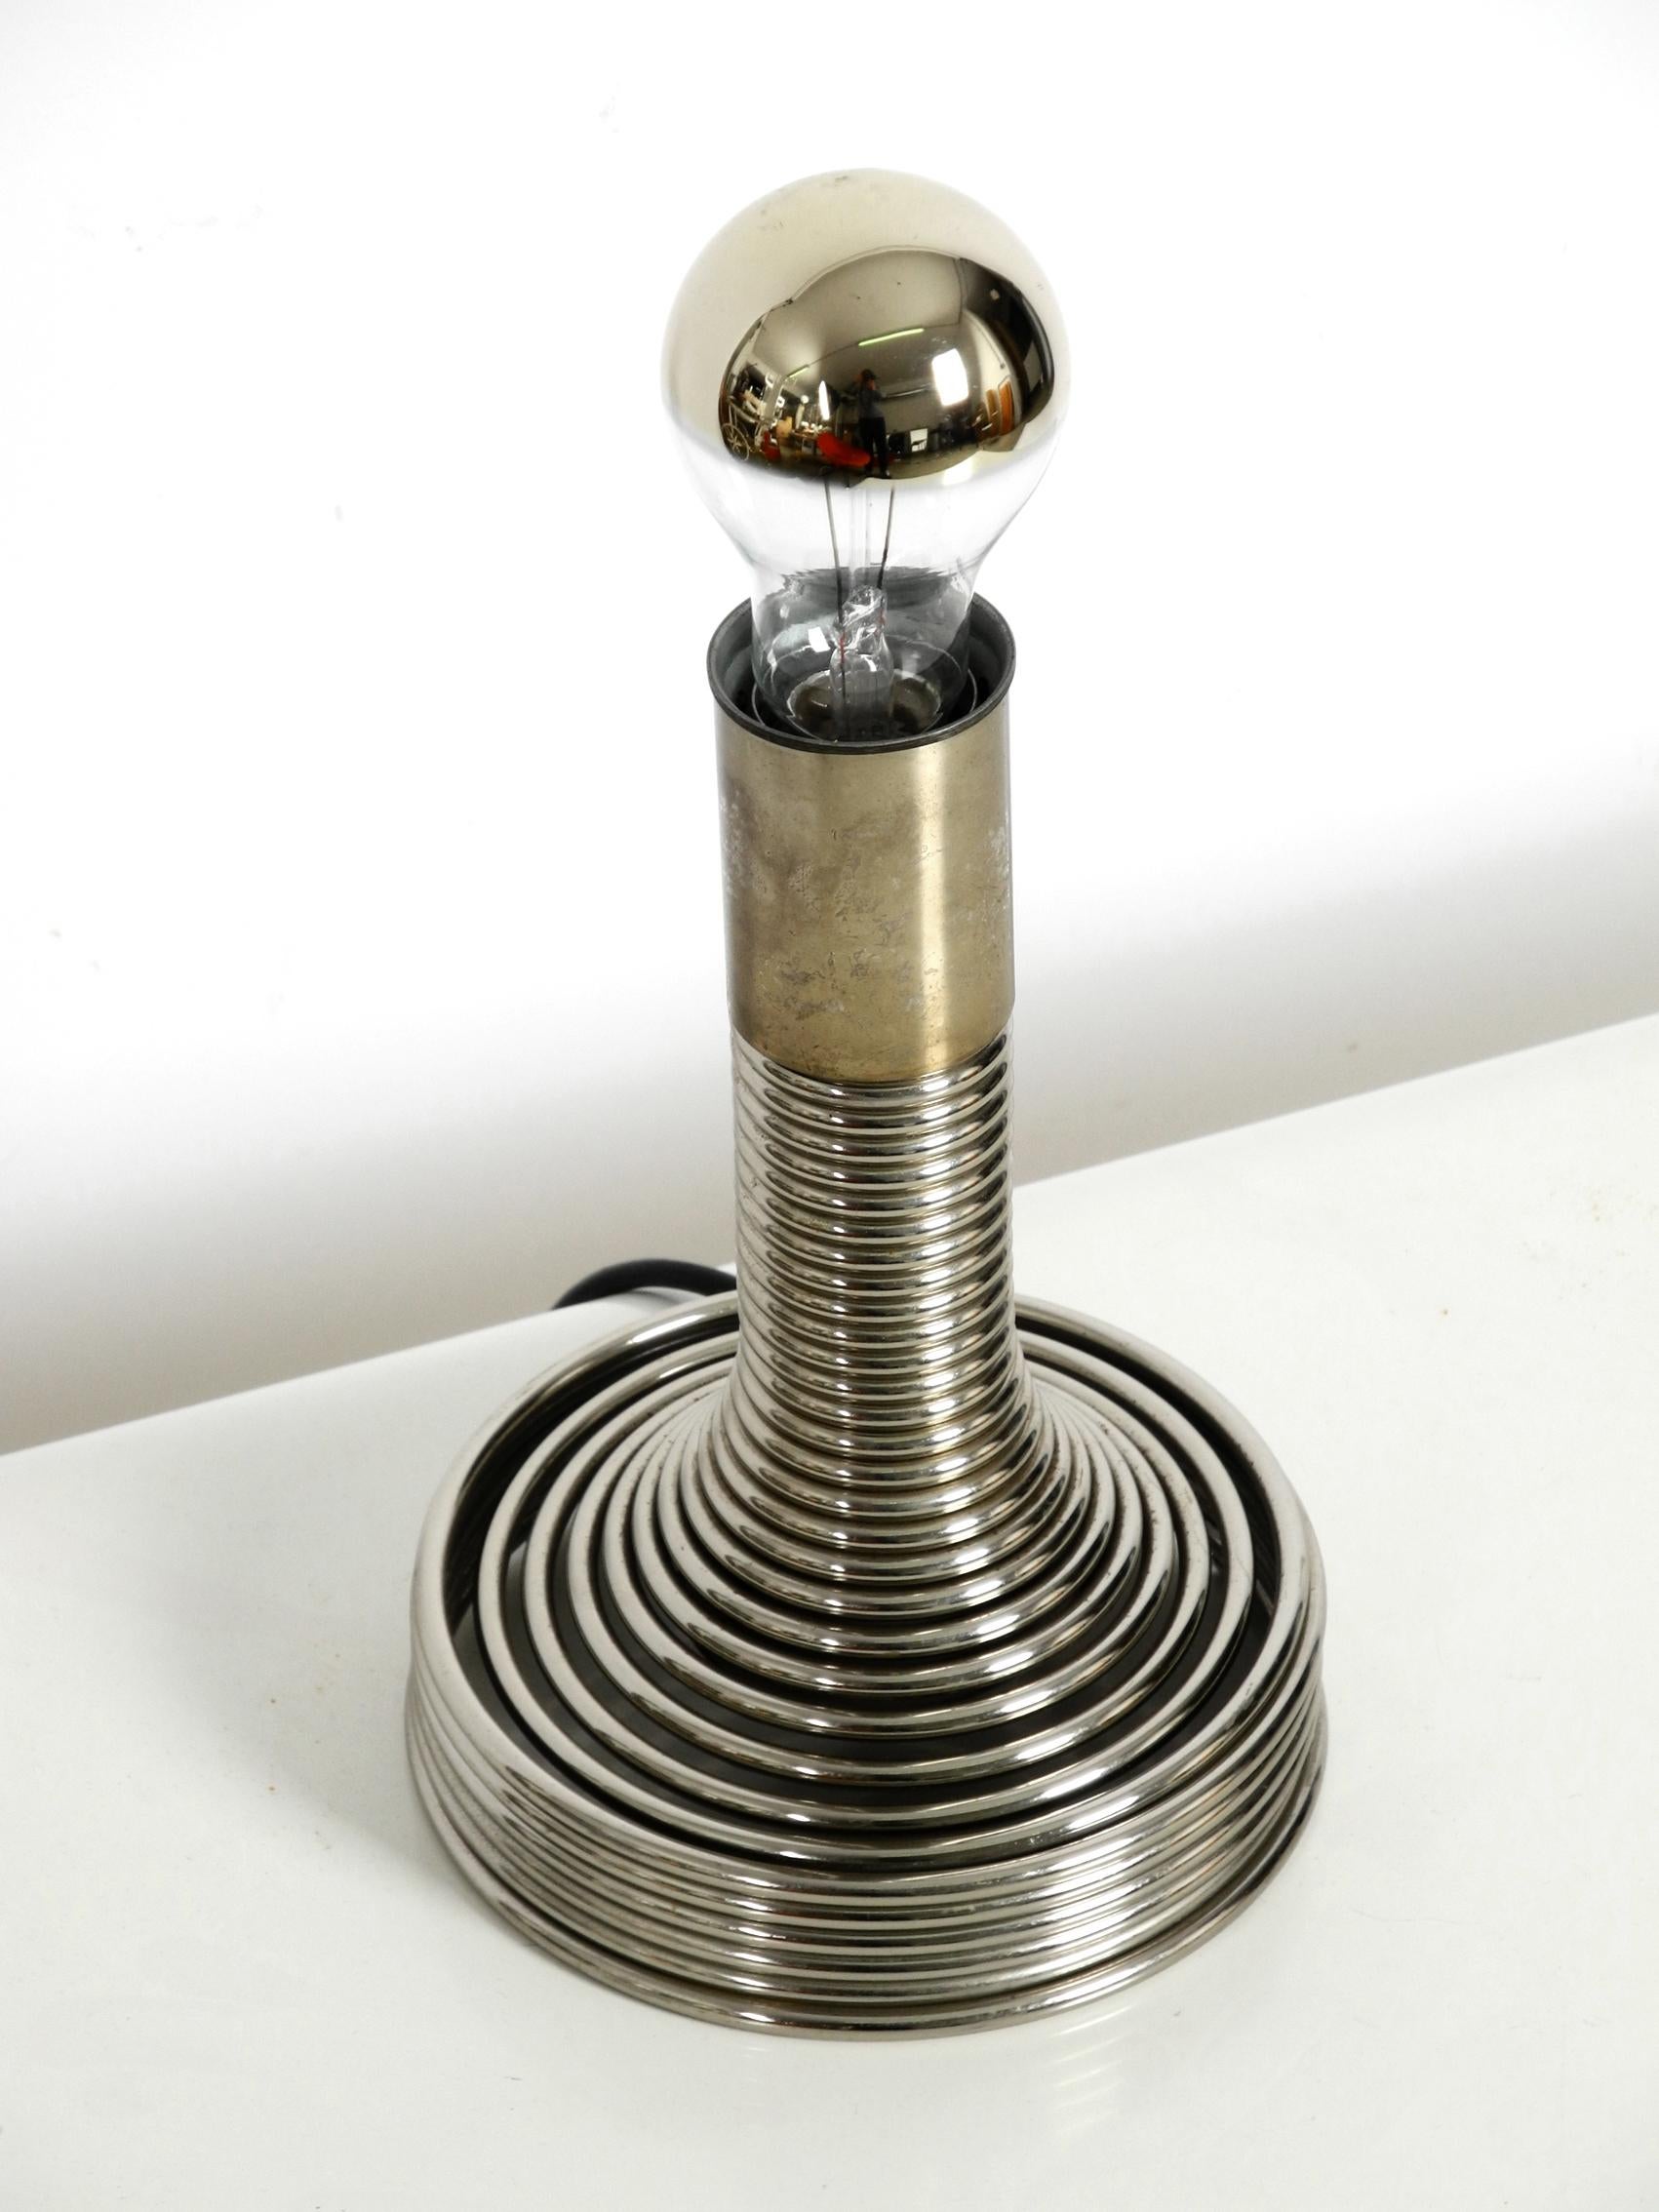 1970s table lamp by Angelo Mangiarotti for Candle. Great Space Age pop art design from the 1970s. One E27 original socket. The lamp is made entirely of chrome-plated metal. At some spots, the chorm is not so shiny anymore. There are no damages to